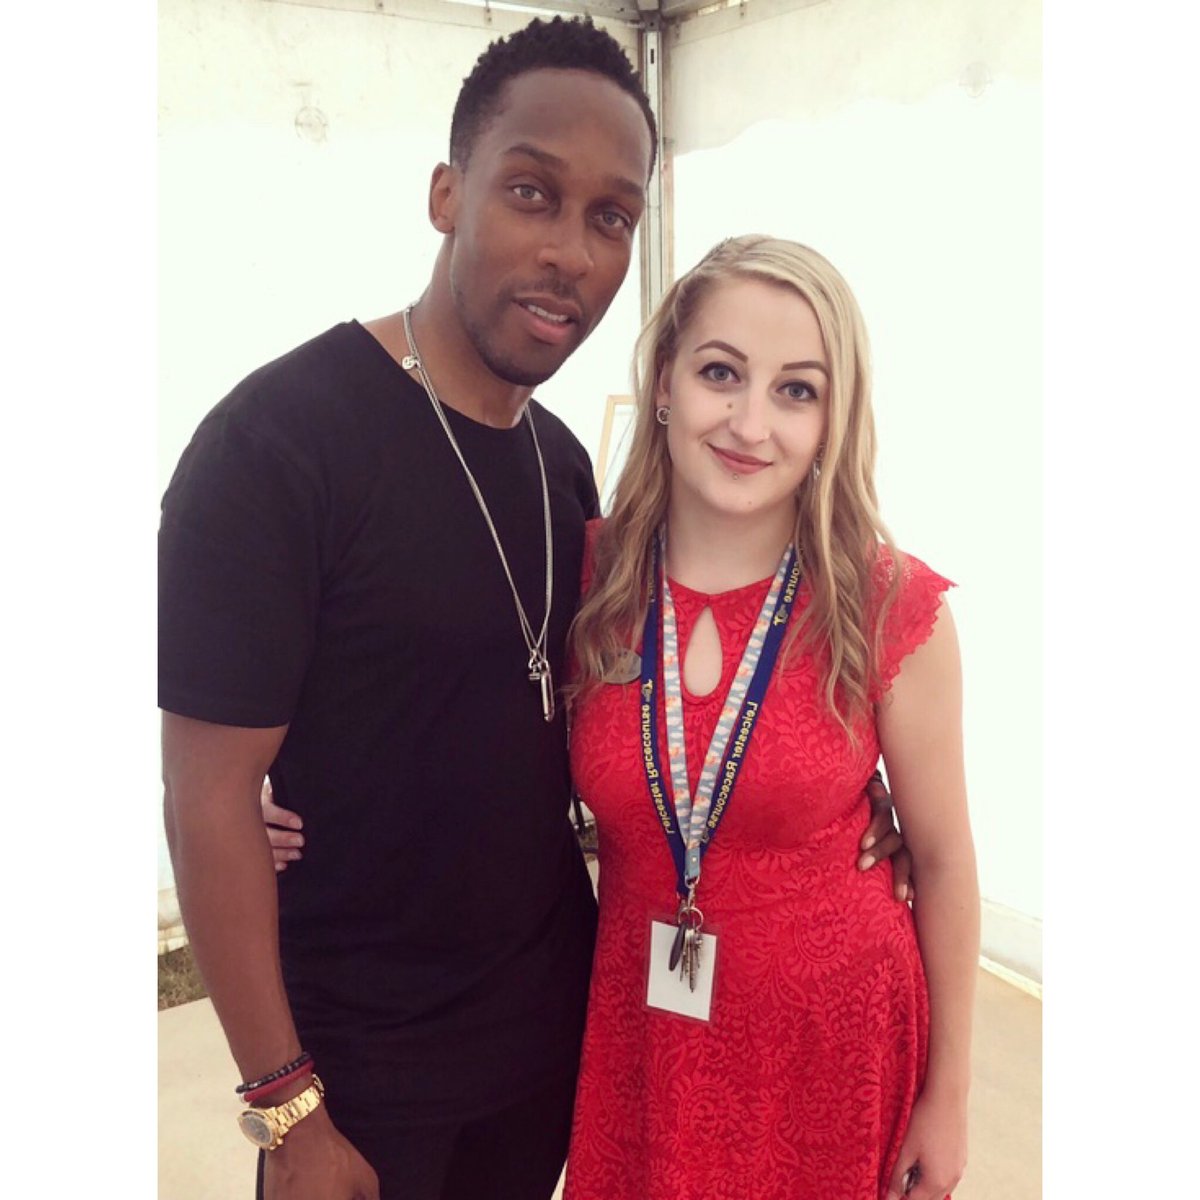 Lovely to see @Lemar again! Perks of the job 😁👌🏼 #leicesterracecourse #leicesterladiesday